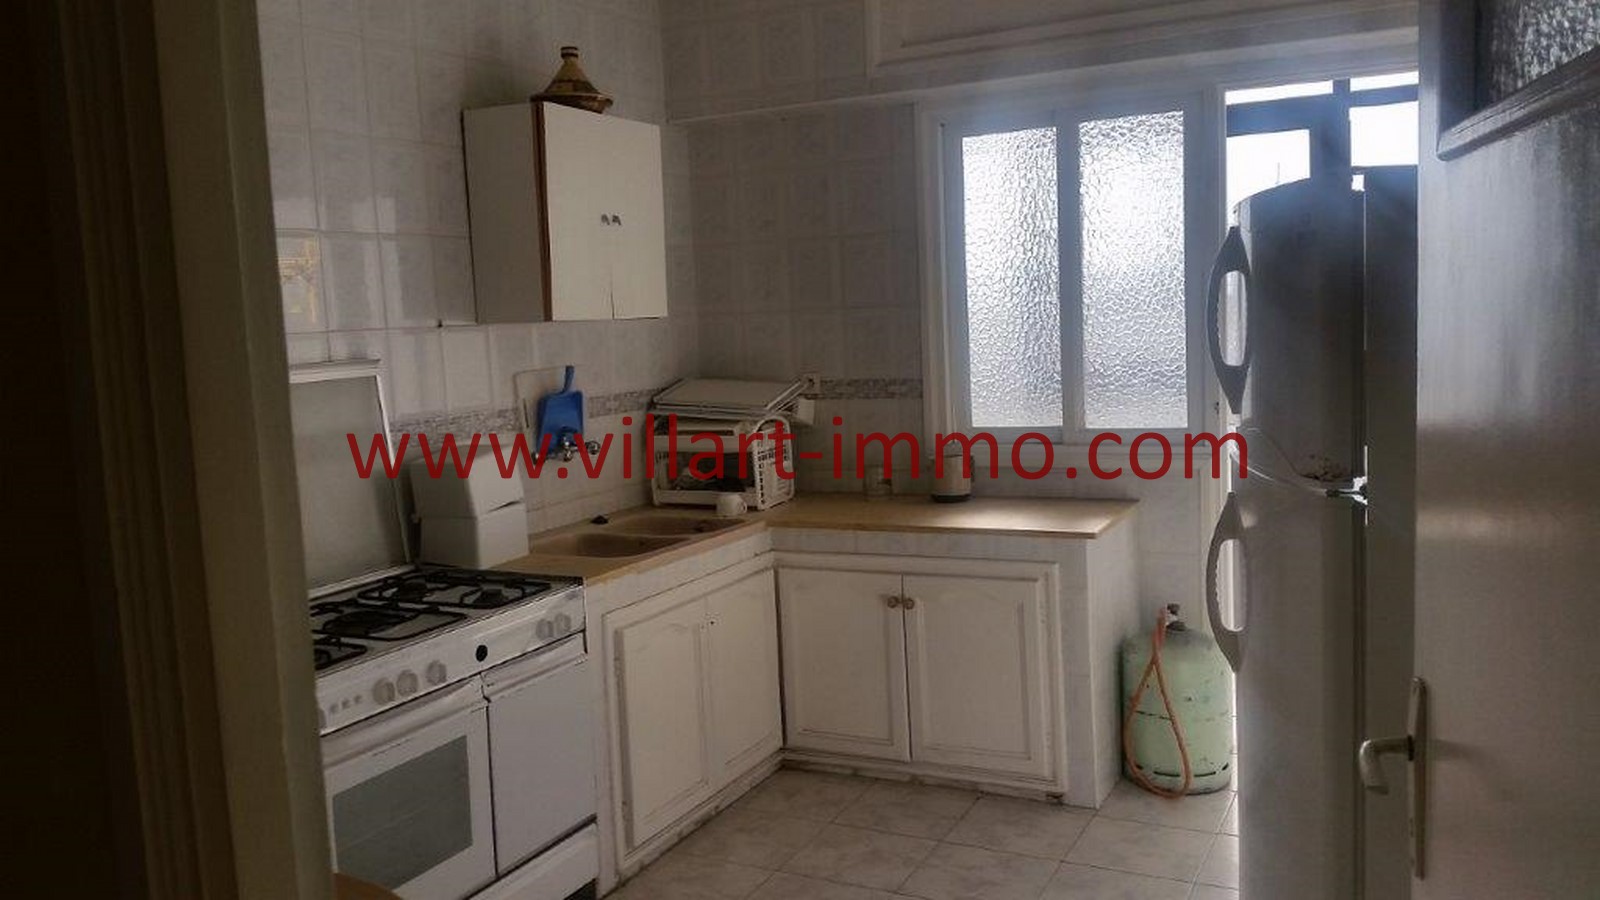 4-location-tanger-appartement-non-meublee-iberia-cuisine-l1013-villart-immo-agence-immobiliere